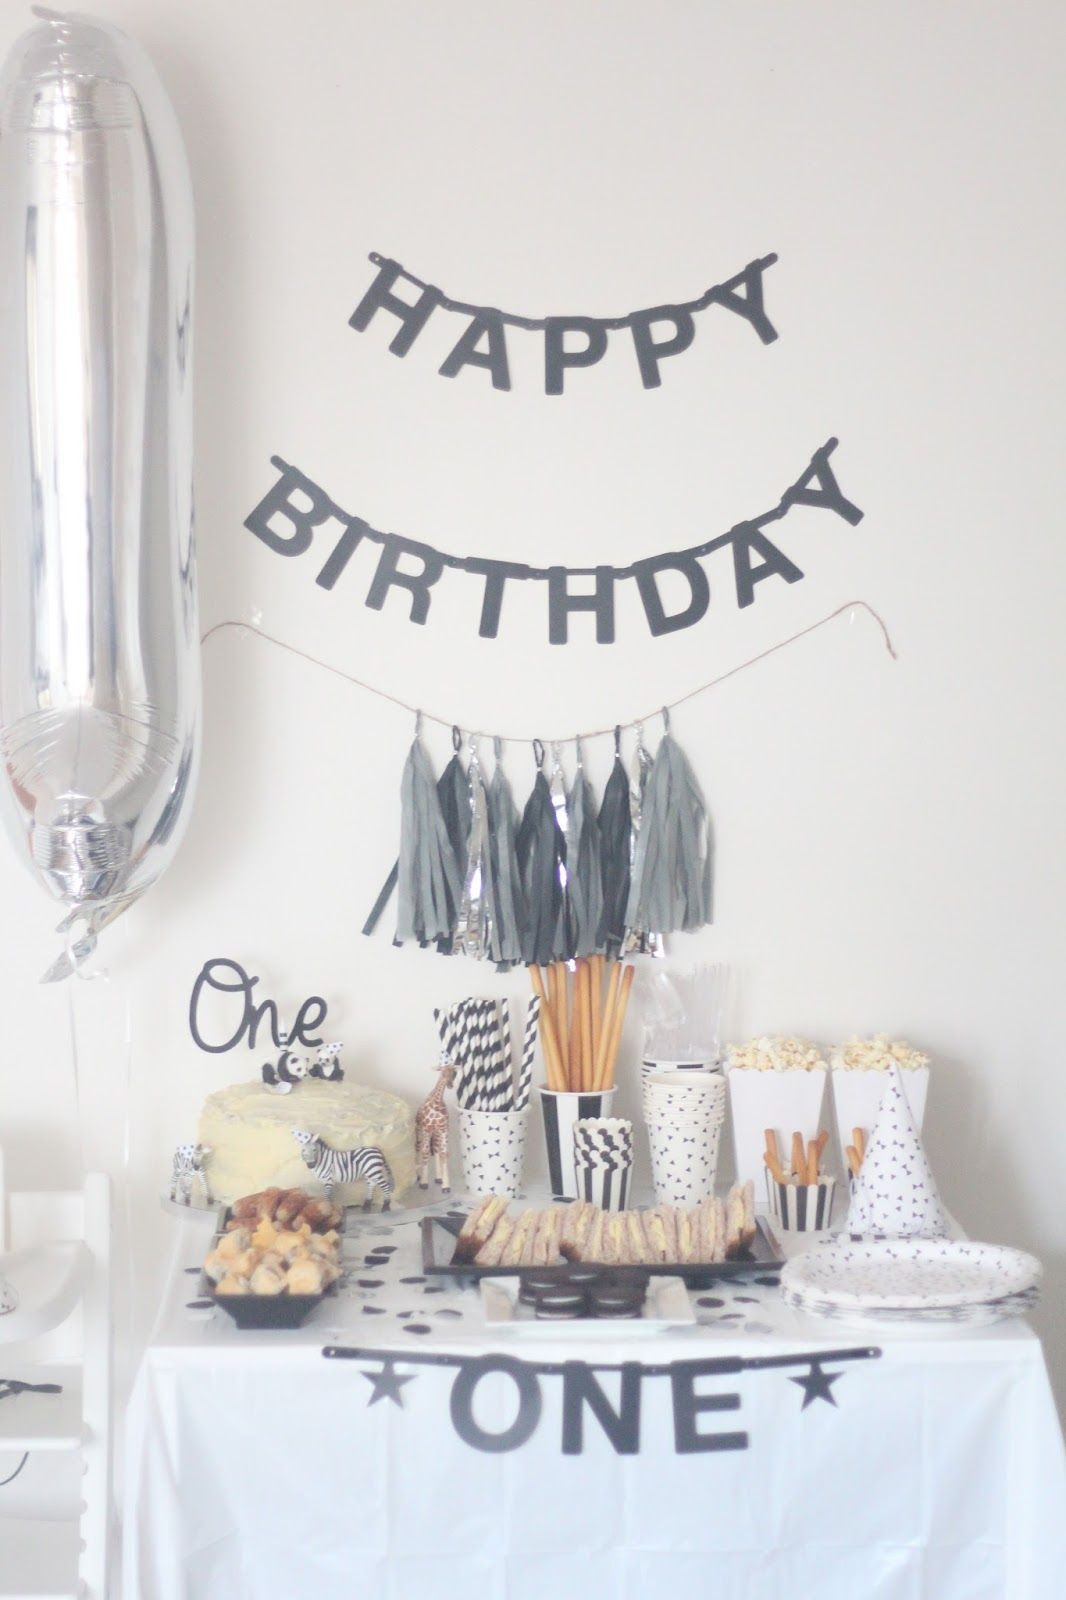 Baby Party Themes For 1St Birthdays
 A Monochrome First Birthday Party